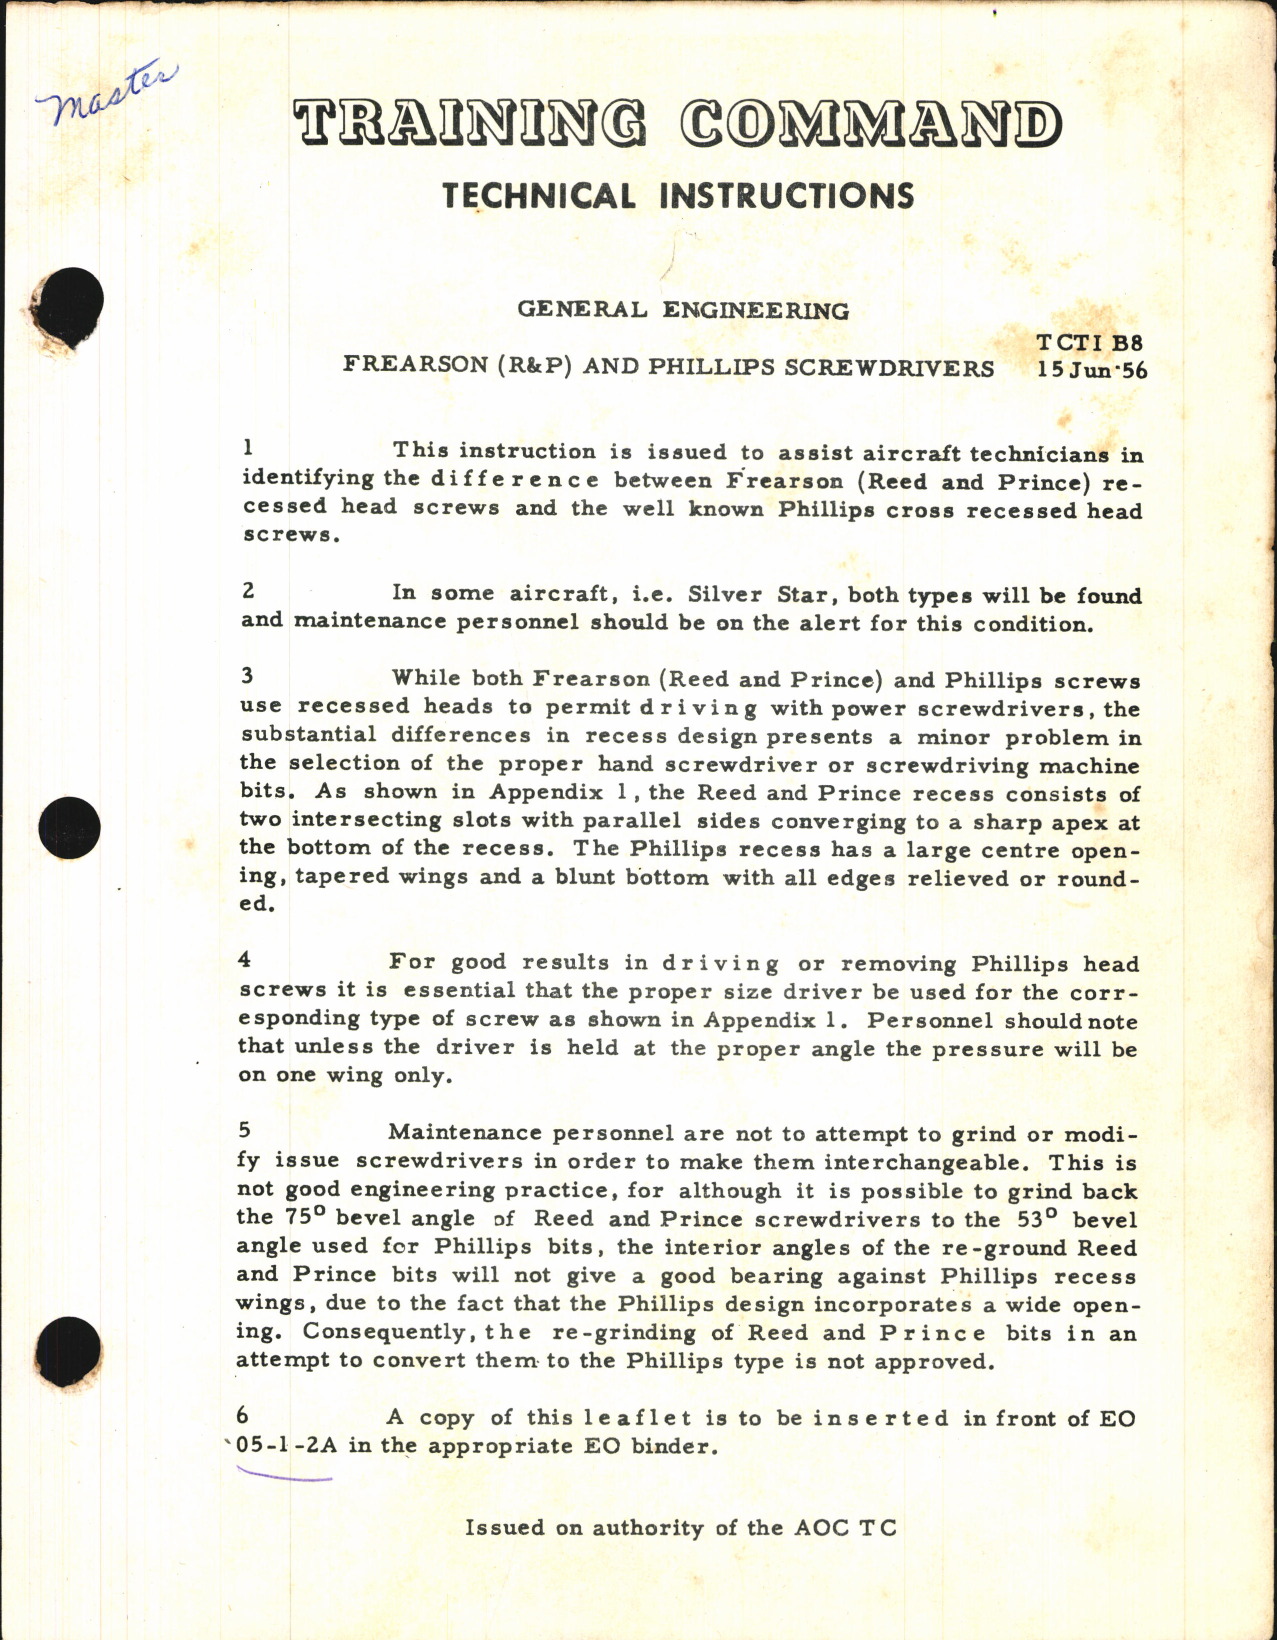 Sample page 1 from AirCorps Library document: Training Command Technical Instructions for Frearson (R&P) and Phillips Screwdrivers